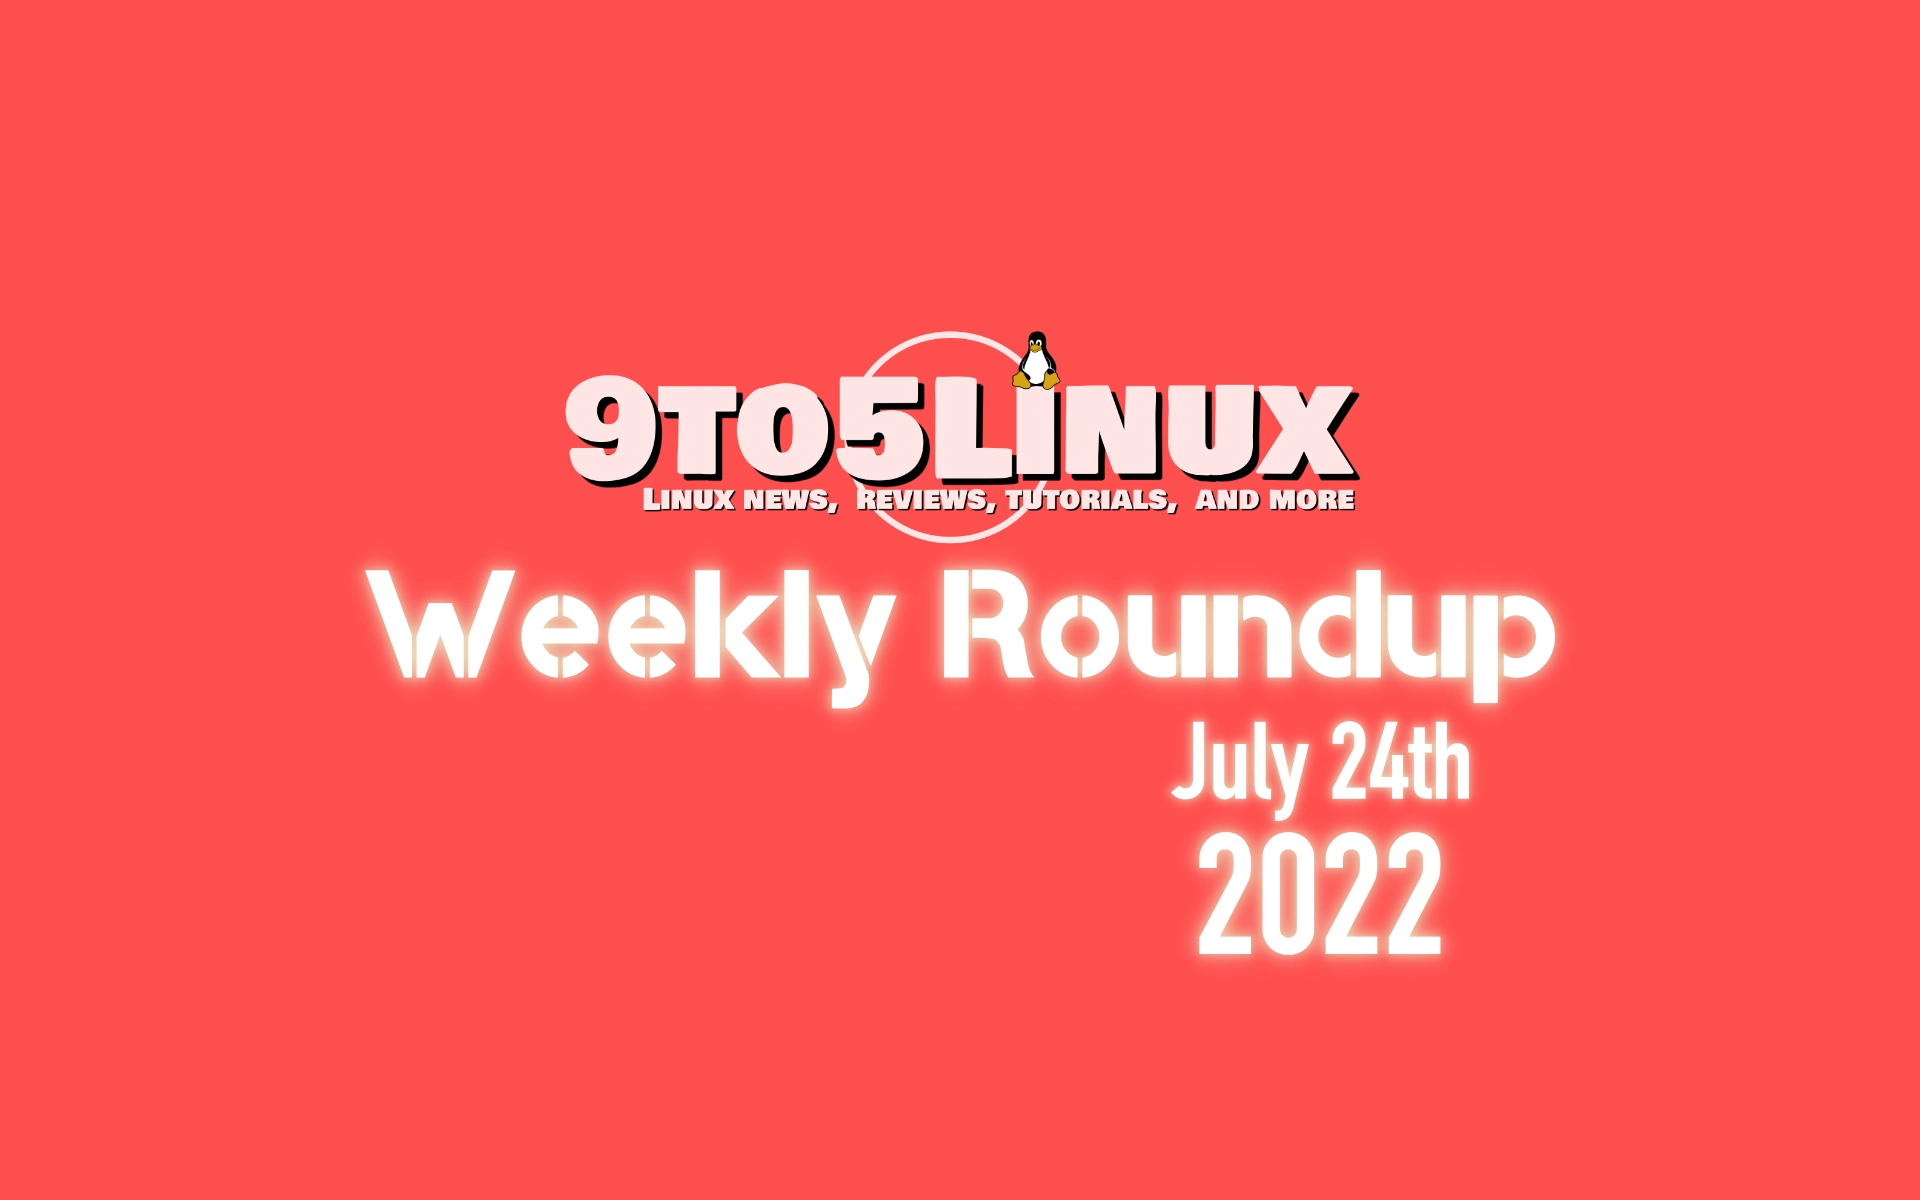 9to5Linux Weekly Roundup: July 24th, 2022